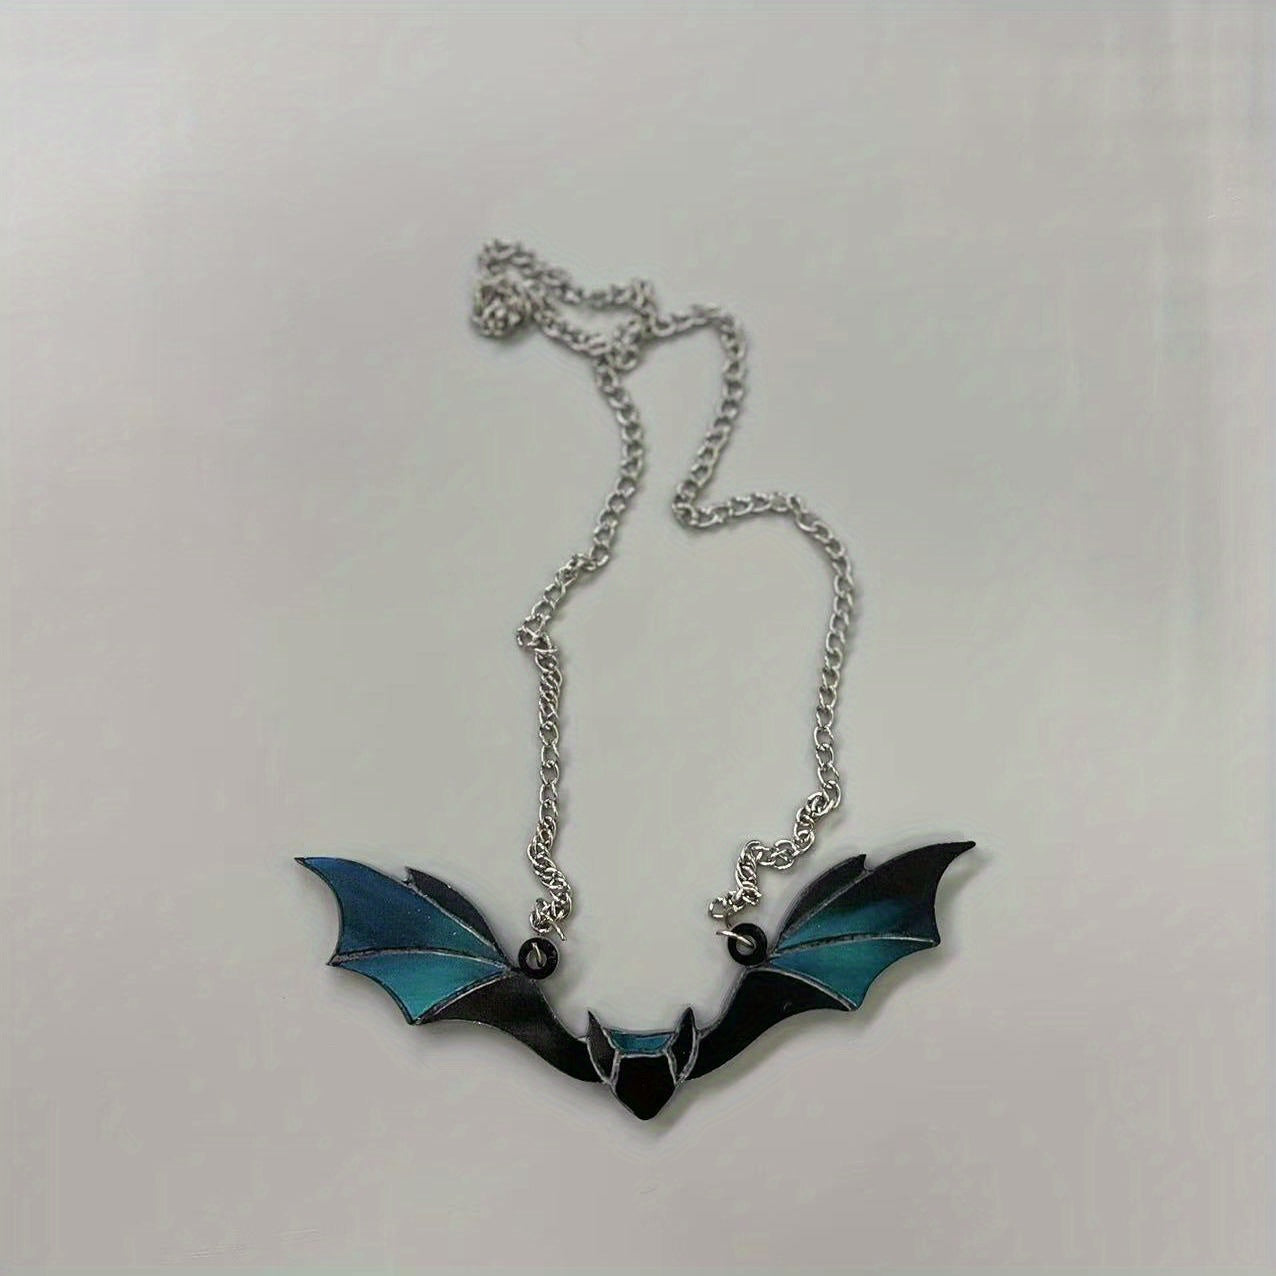 Add a Spooky Touch to Your Home with this Colorful Bat Pendant Decor - Perfect for Halloween, Gothic, Bar, KTV & Party Decor!